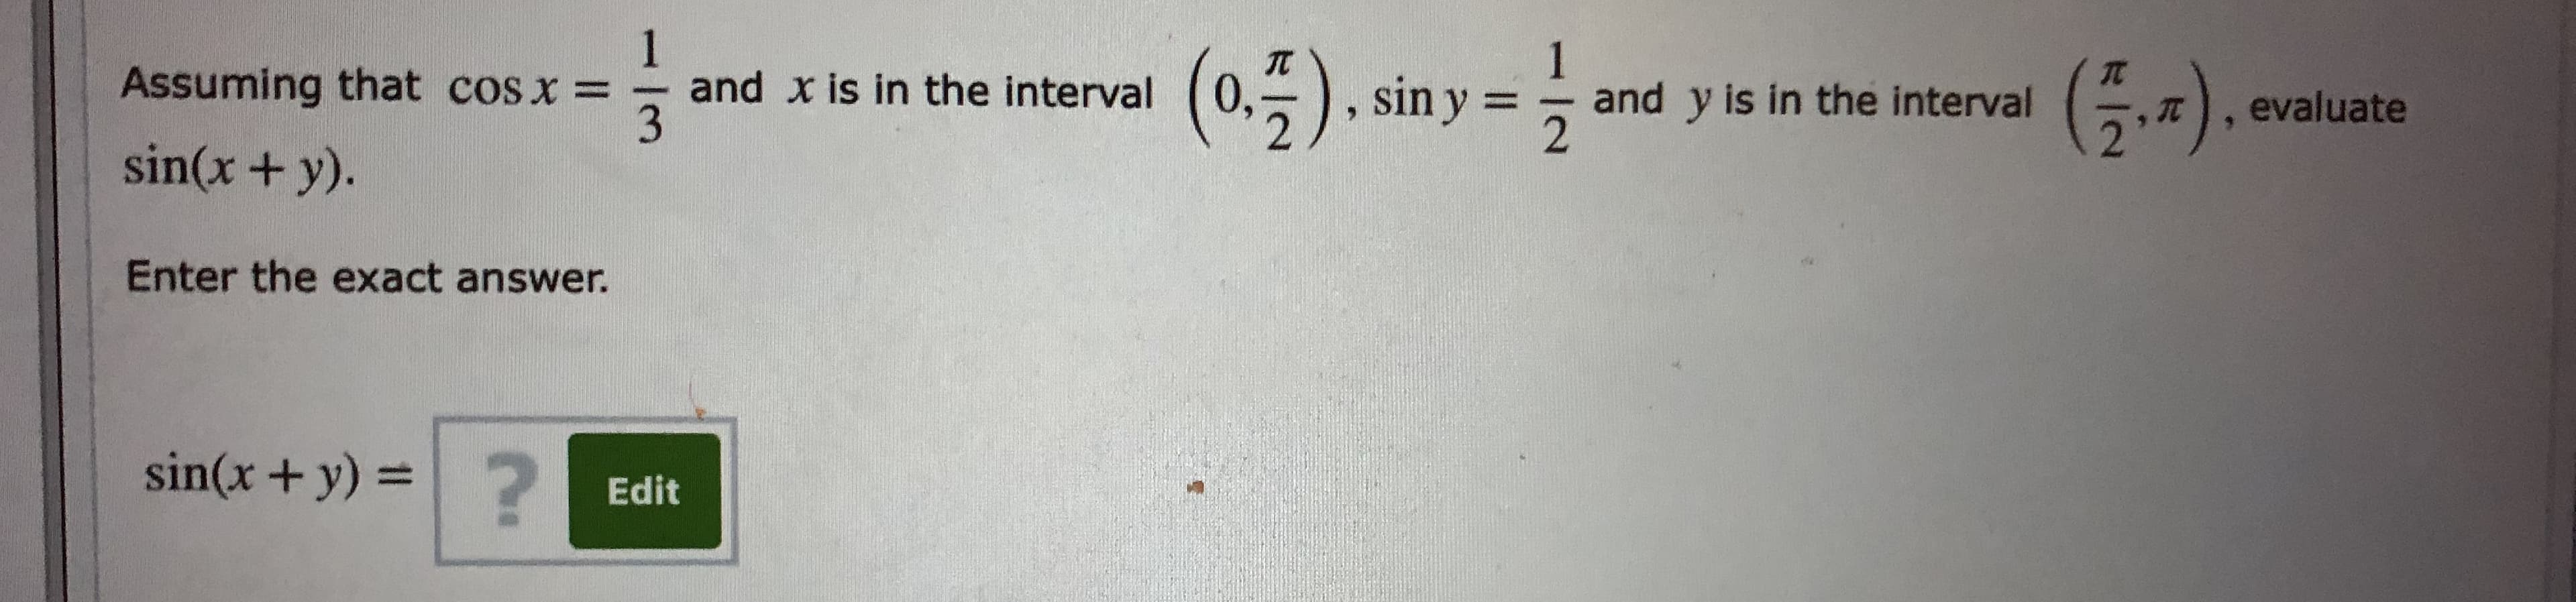 1
and x is in the interval
:-
1
and y is in the interval
It
(0.5). siny=
(-).
Assuming that cos x =
Ga), evaluate
sin(x+y).
Enter the exact answer.
sin(x+ y) =|
Edit
